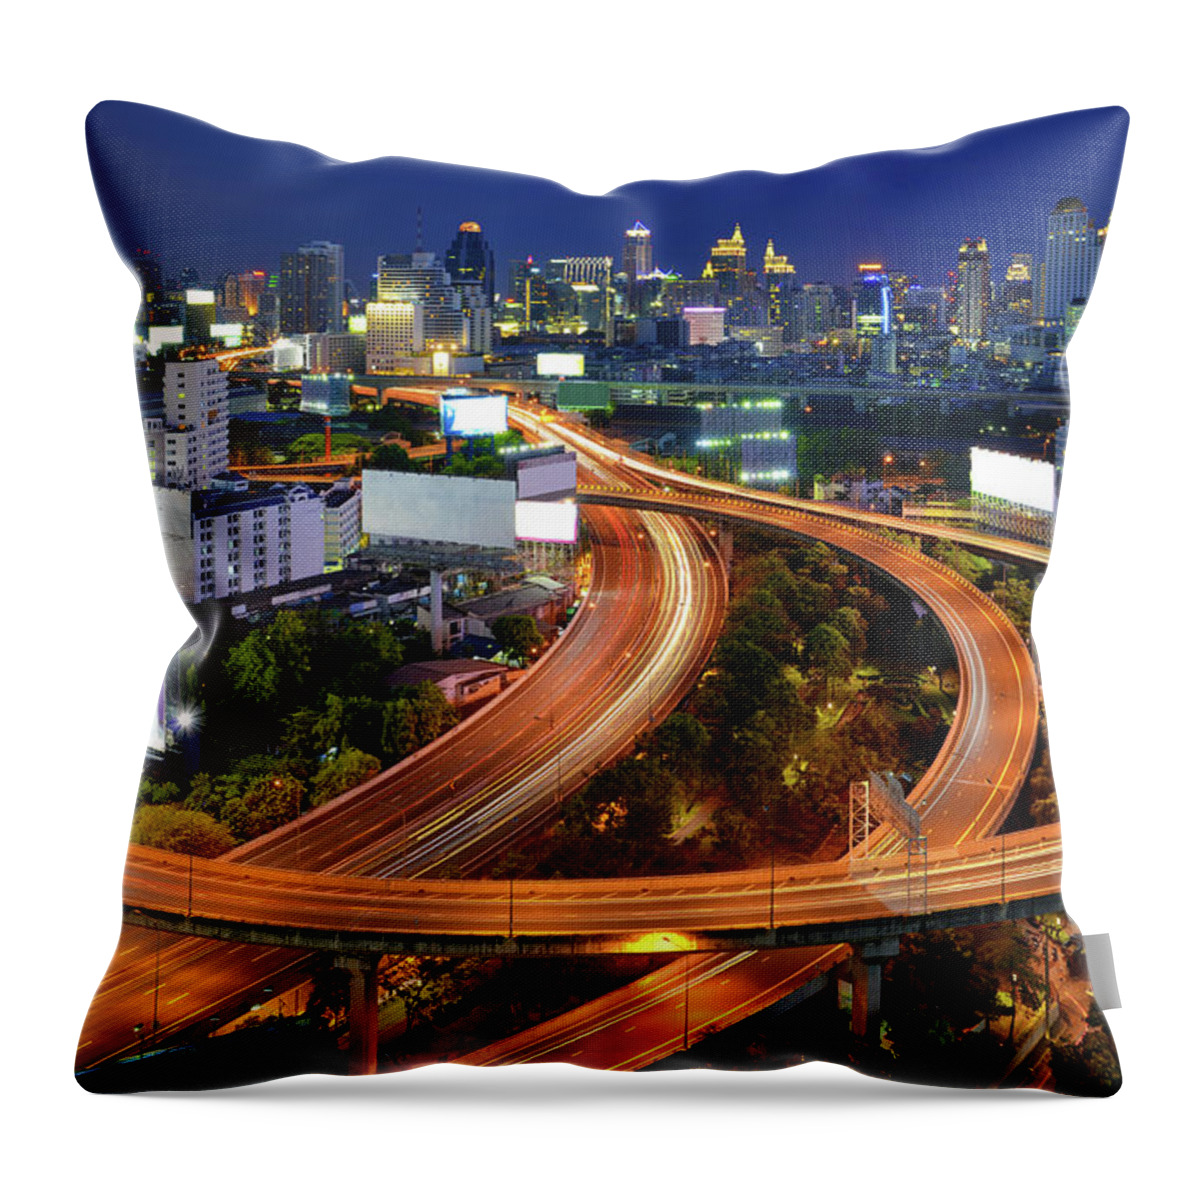 Outdoors Throw Pillow featuring the photograph Bangkok Night_expressway Thailand by Nanut Bovorn